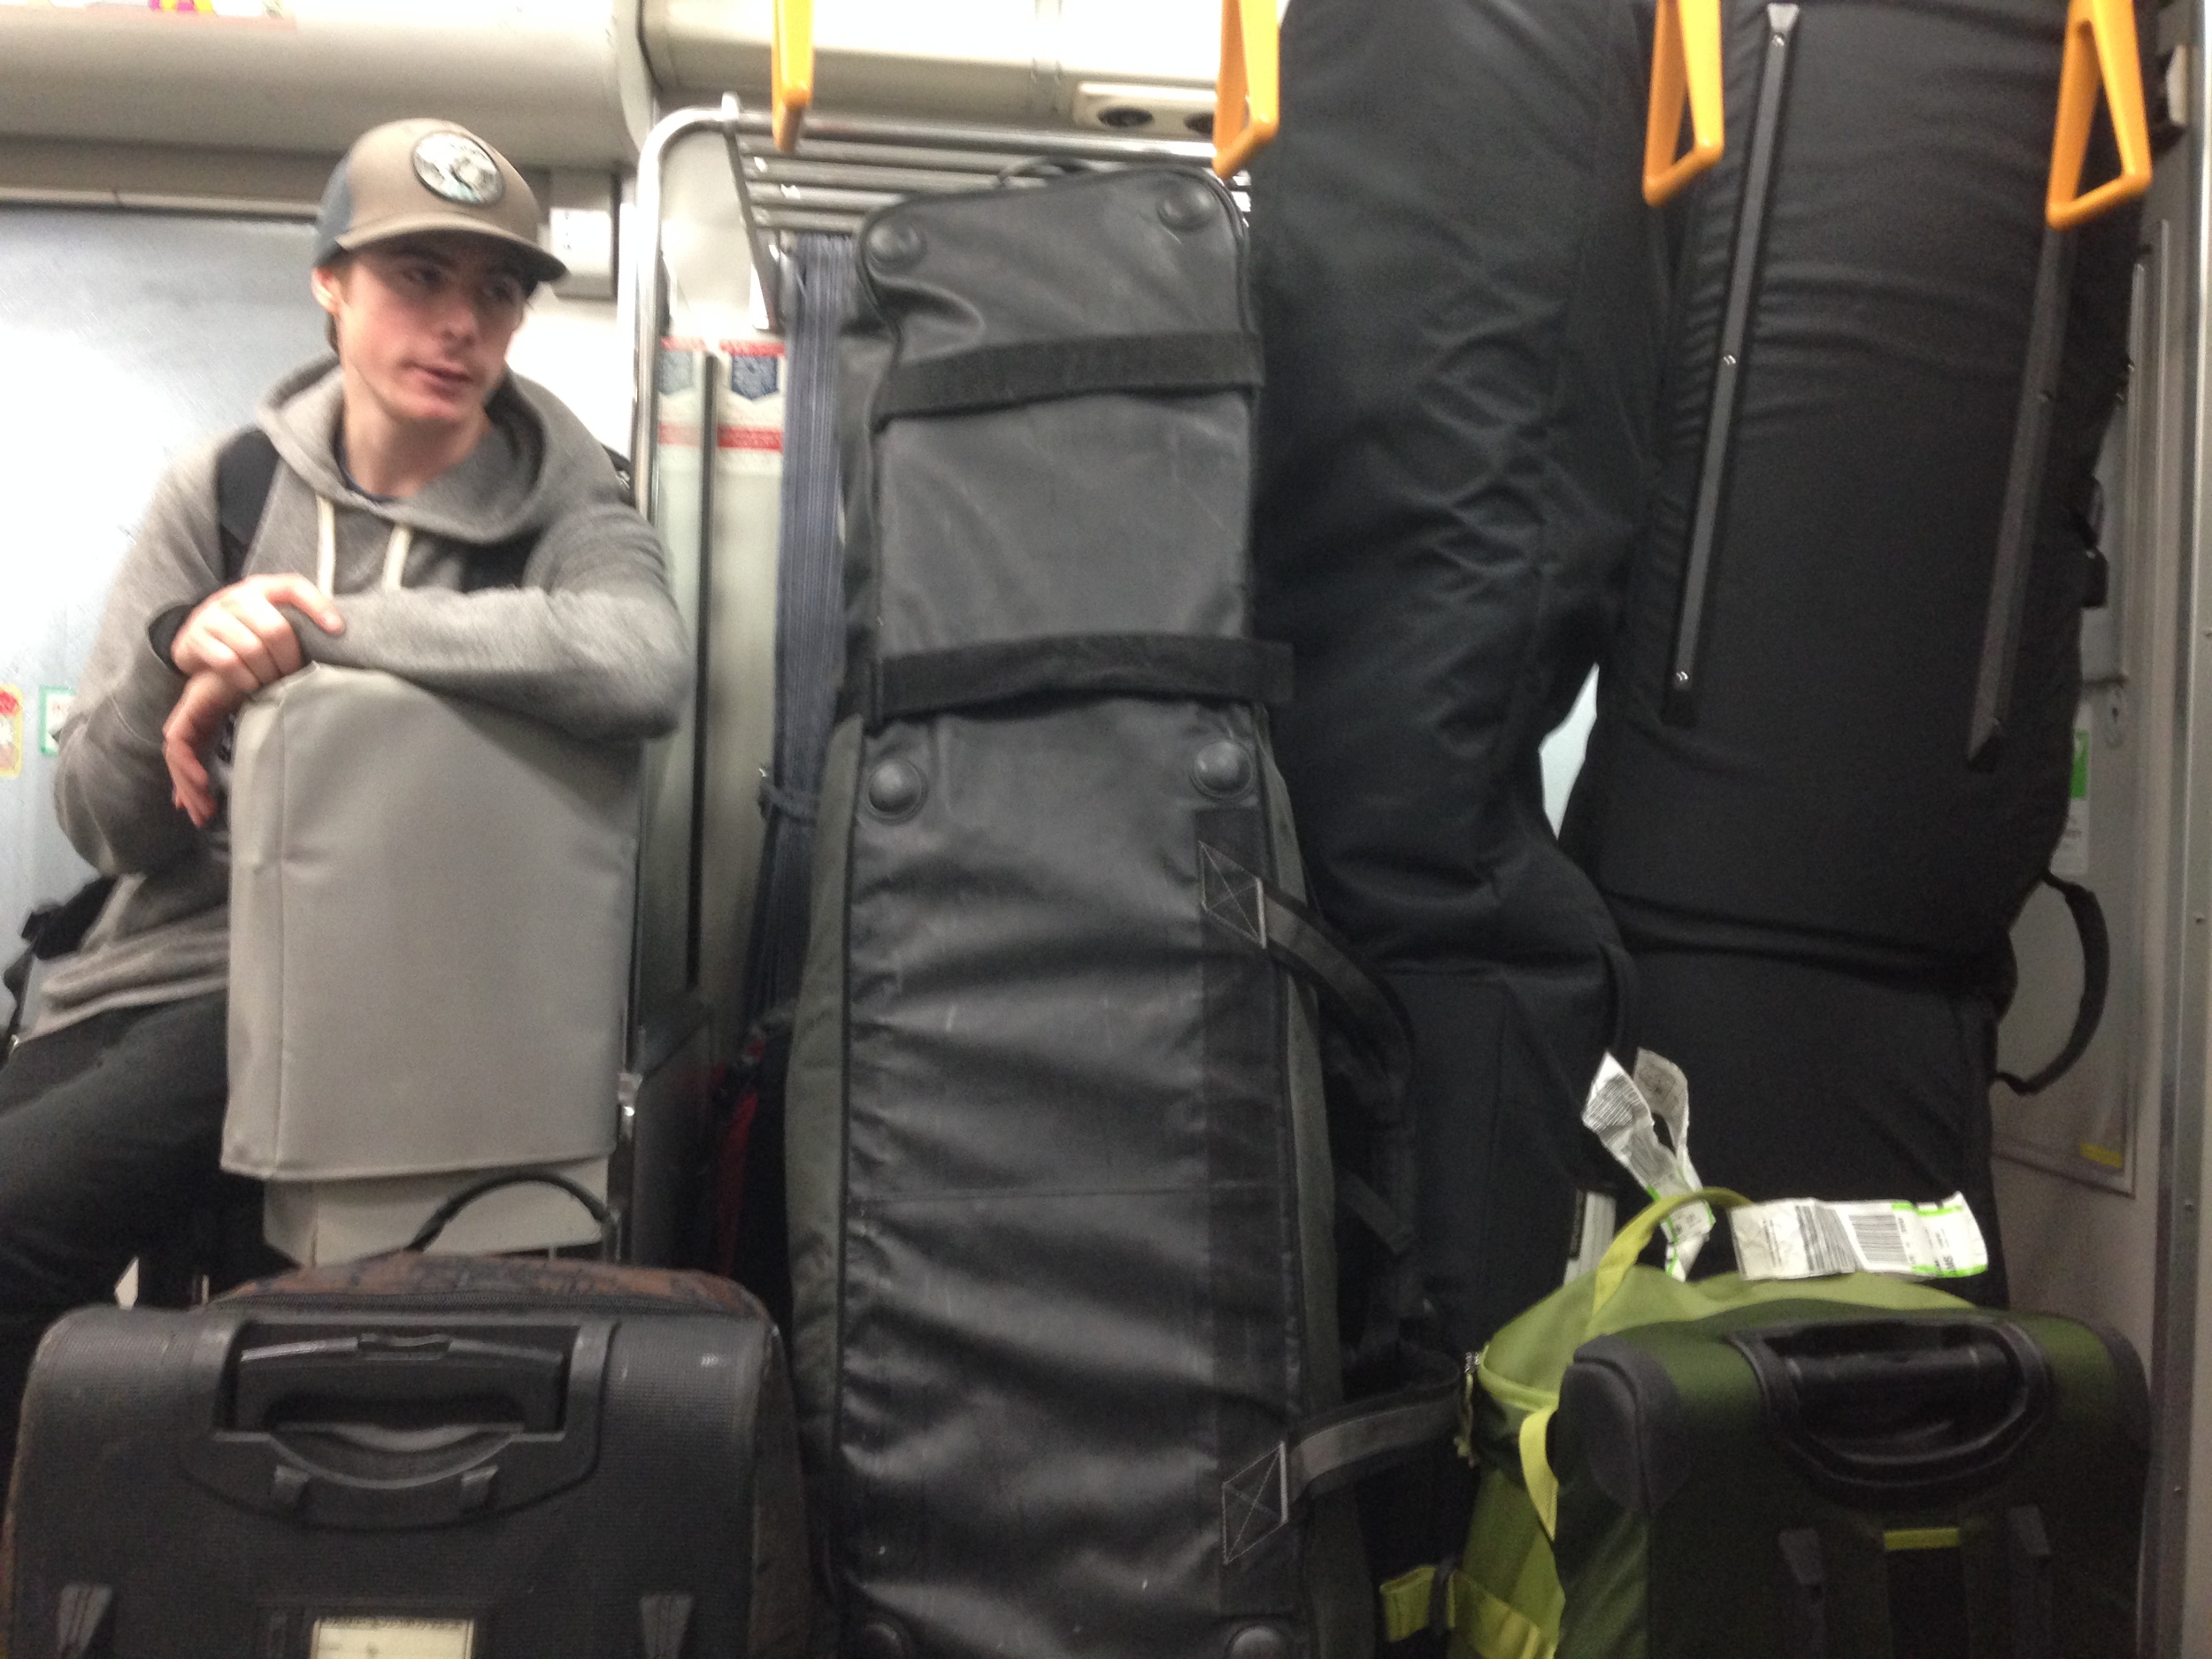 bags on a train